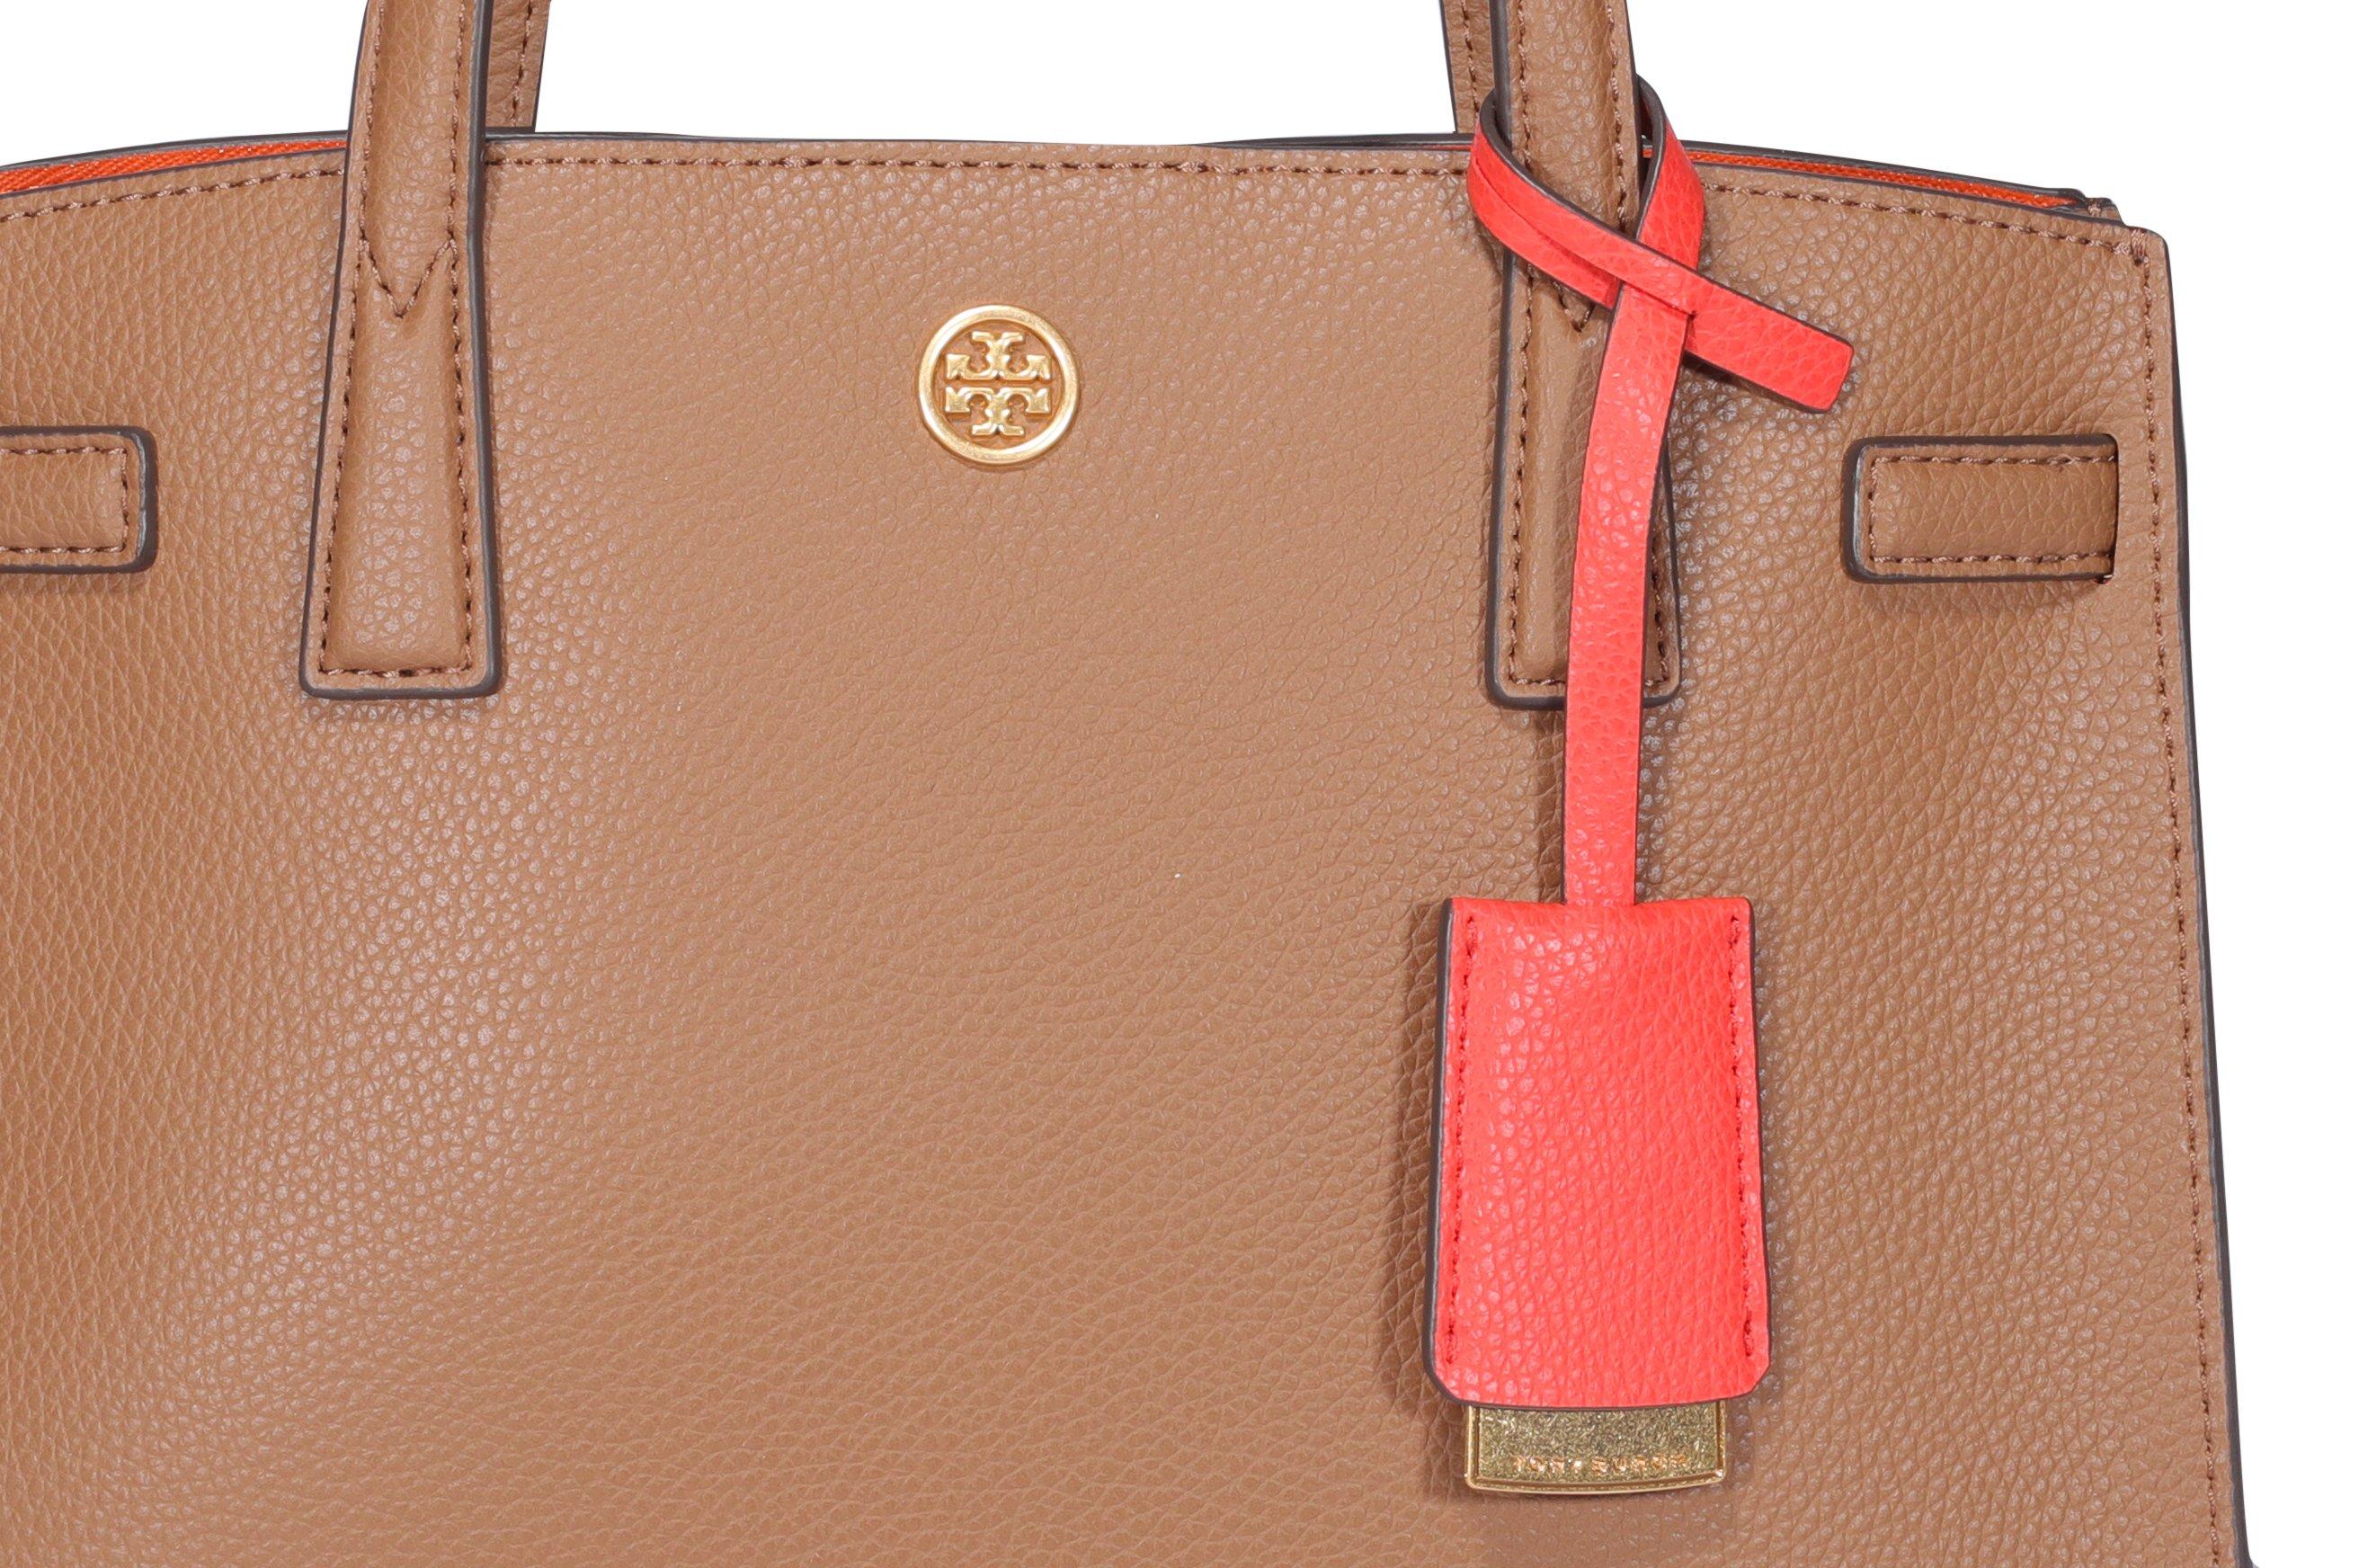 Tory Burch Leather Walker Small Satchel Bag in Brown - Lyst